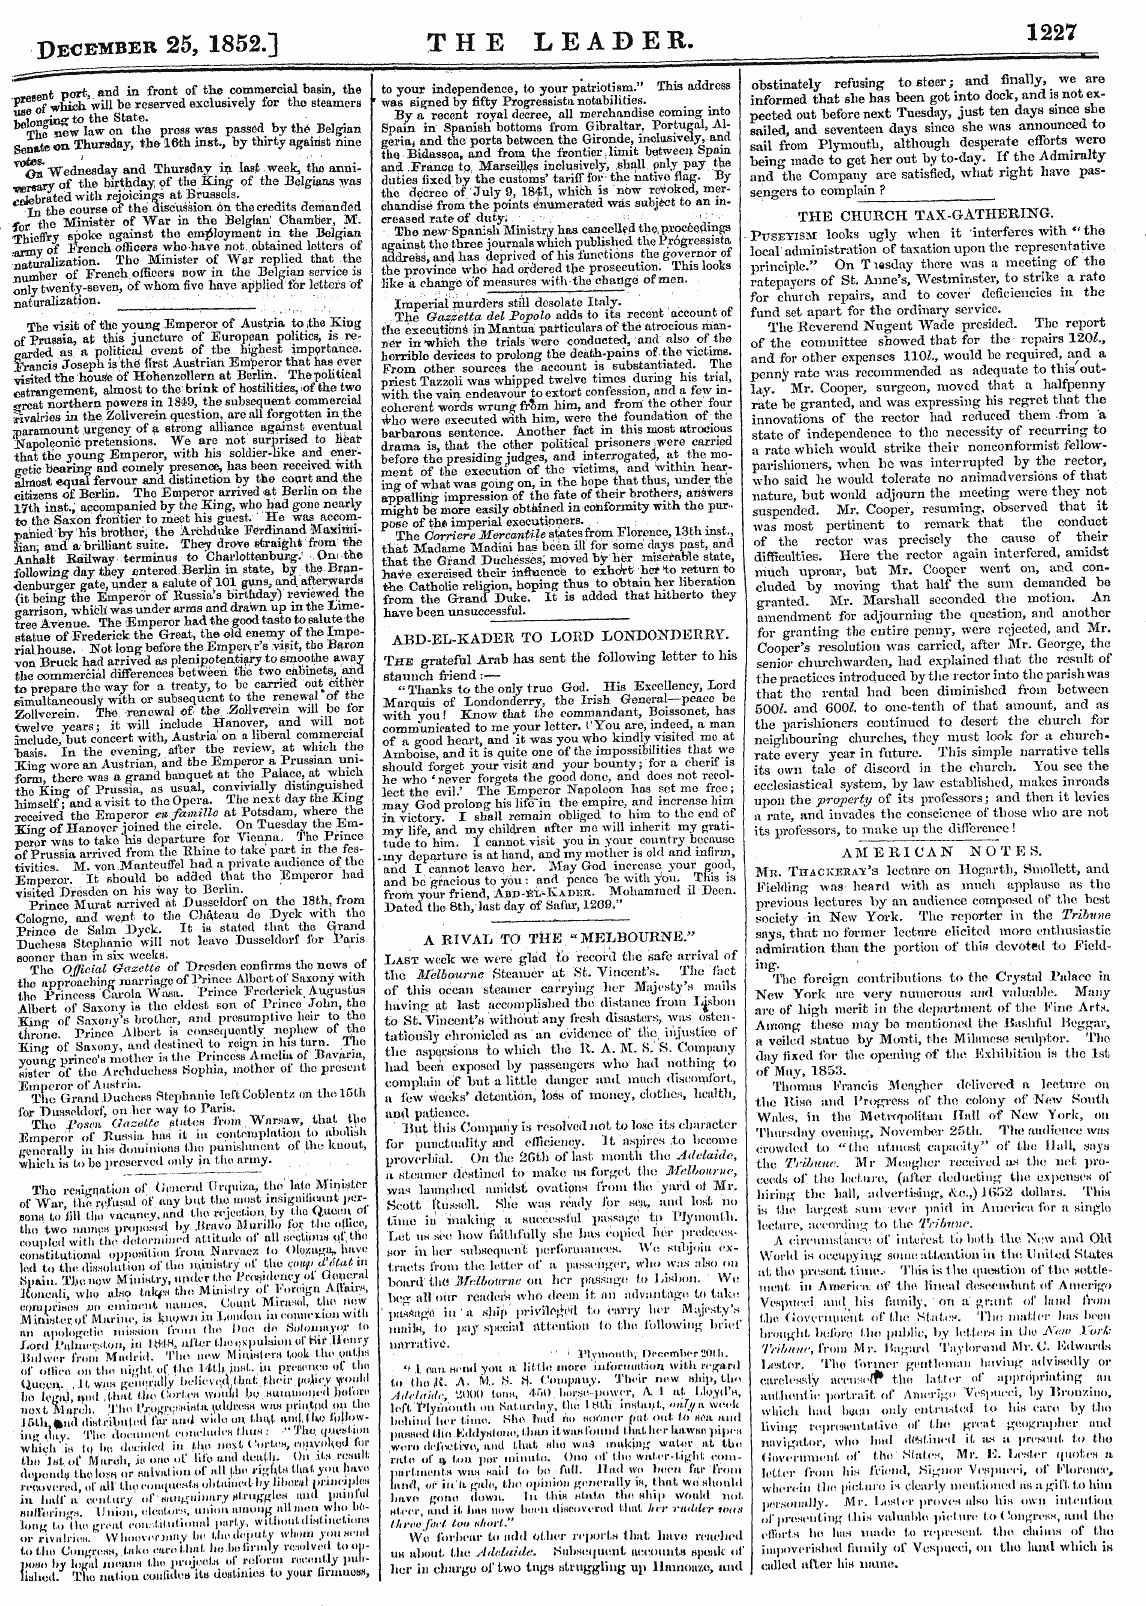 Leader (1850-1860): jS F Y, Country edition - Dec Ember 25, 1852.] The Leader. 1227